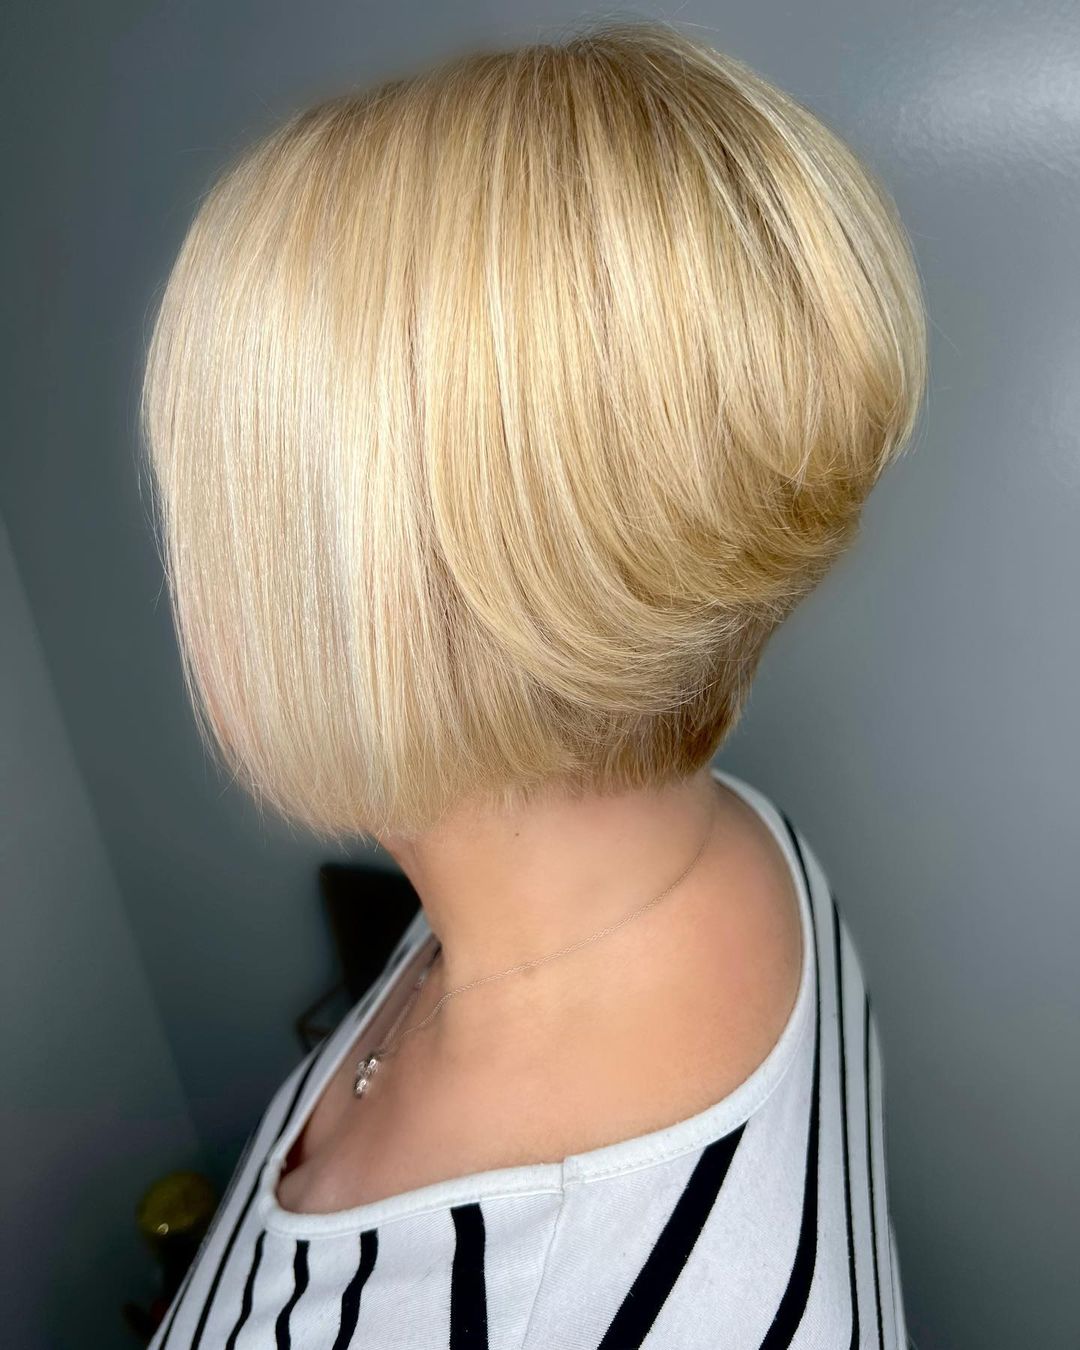 Stacked Bob 47 Long stacked bob | Medium length stacked bob | Pictures of stacked bob haircuts front and back Stacked Bob Hairstyles for Women